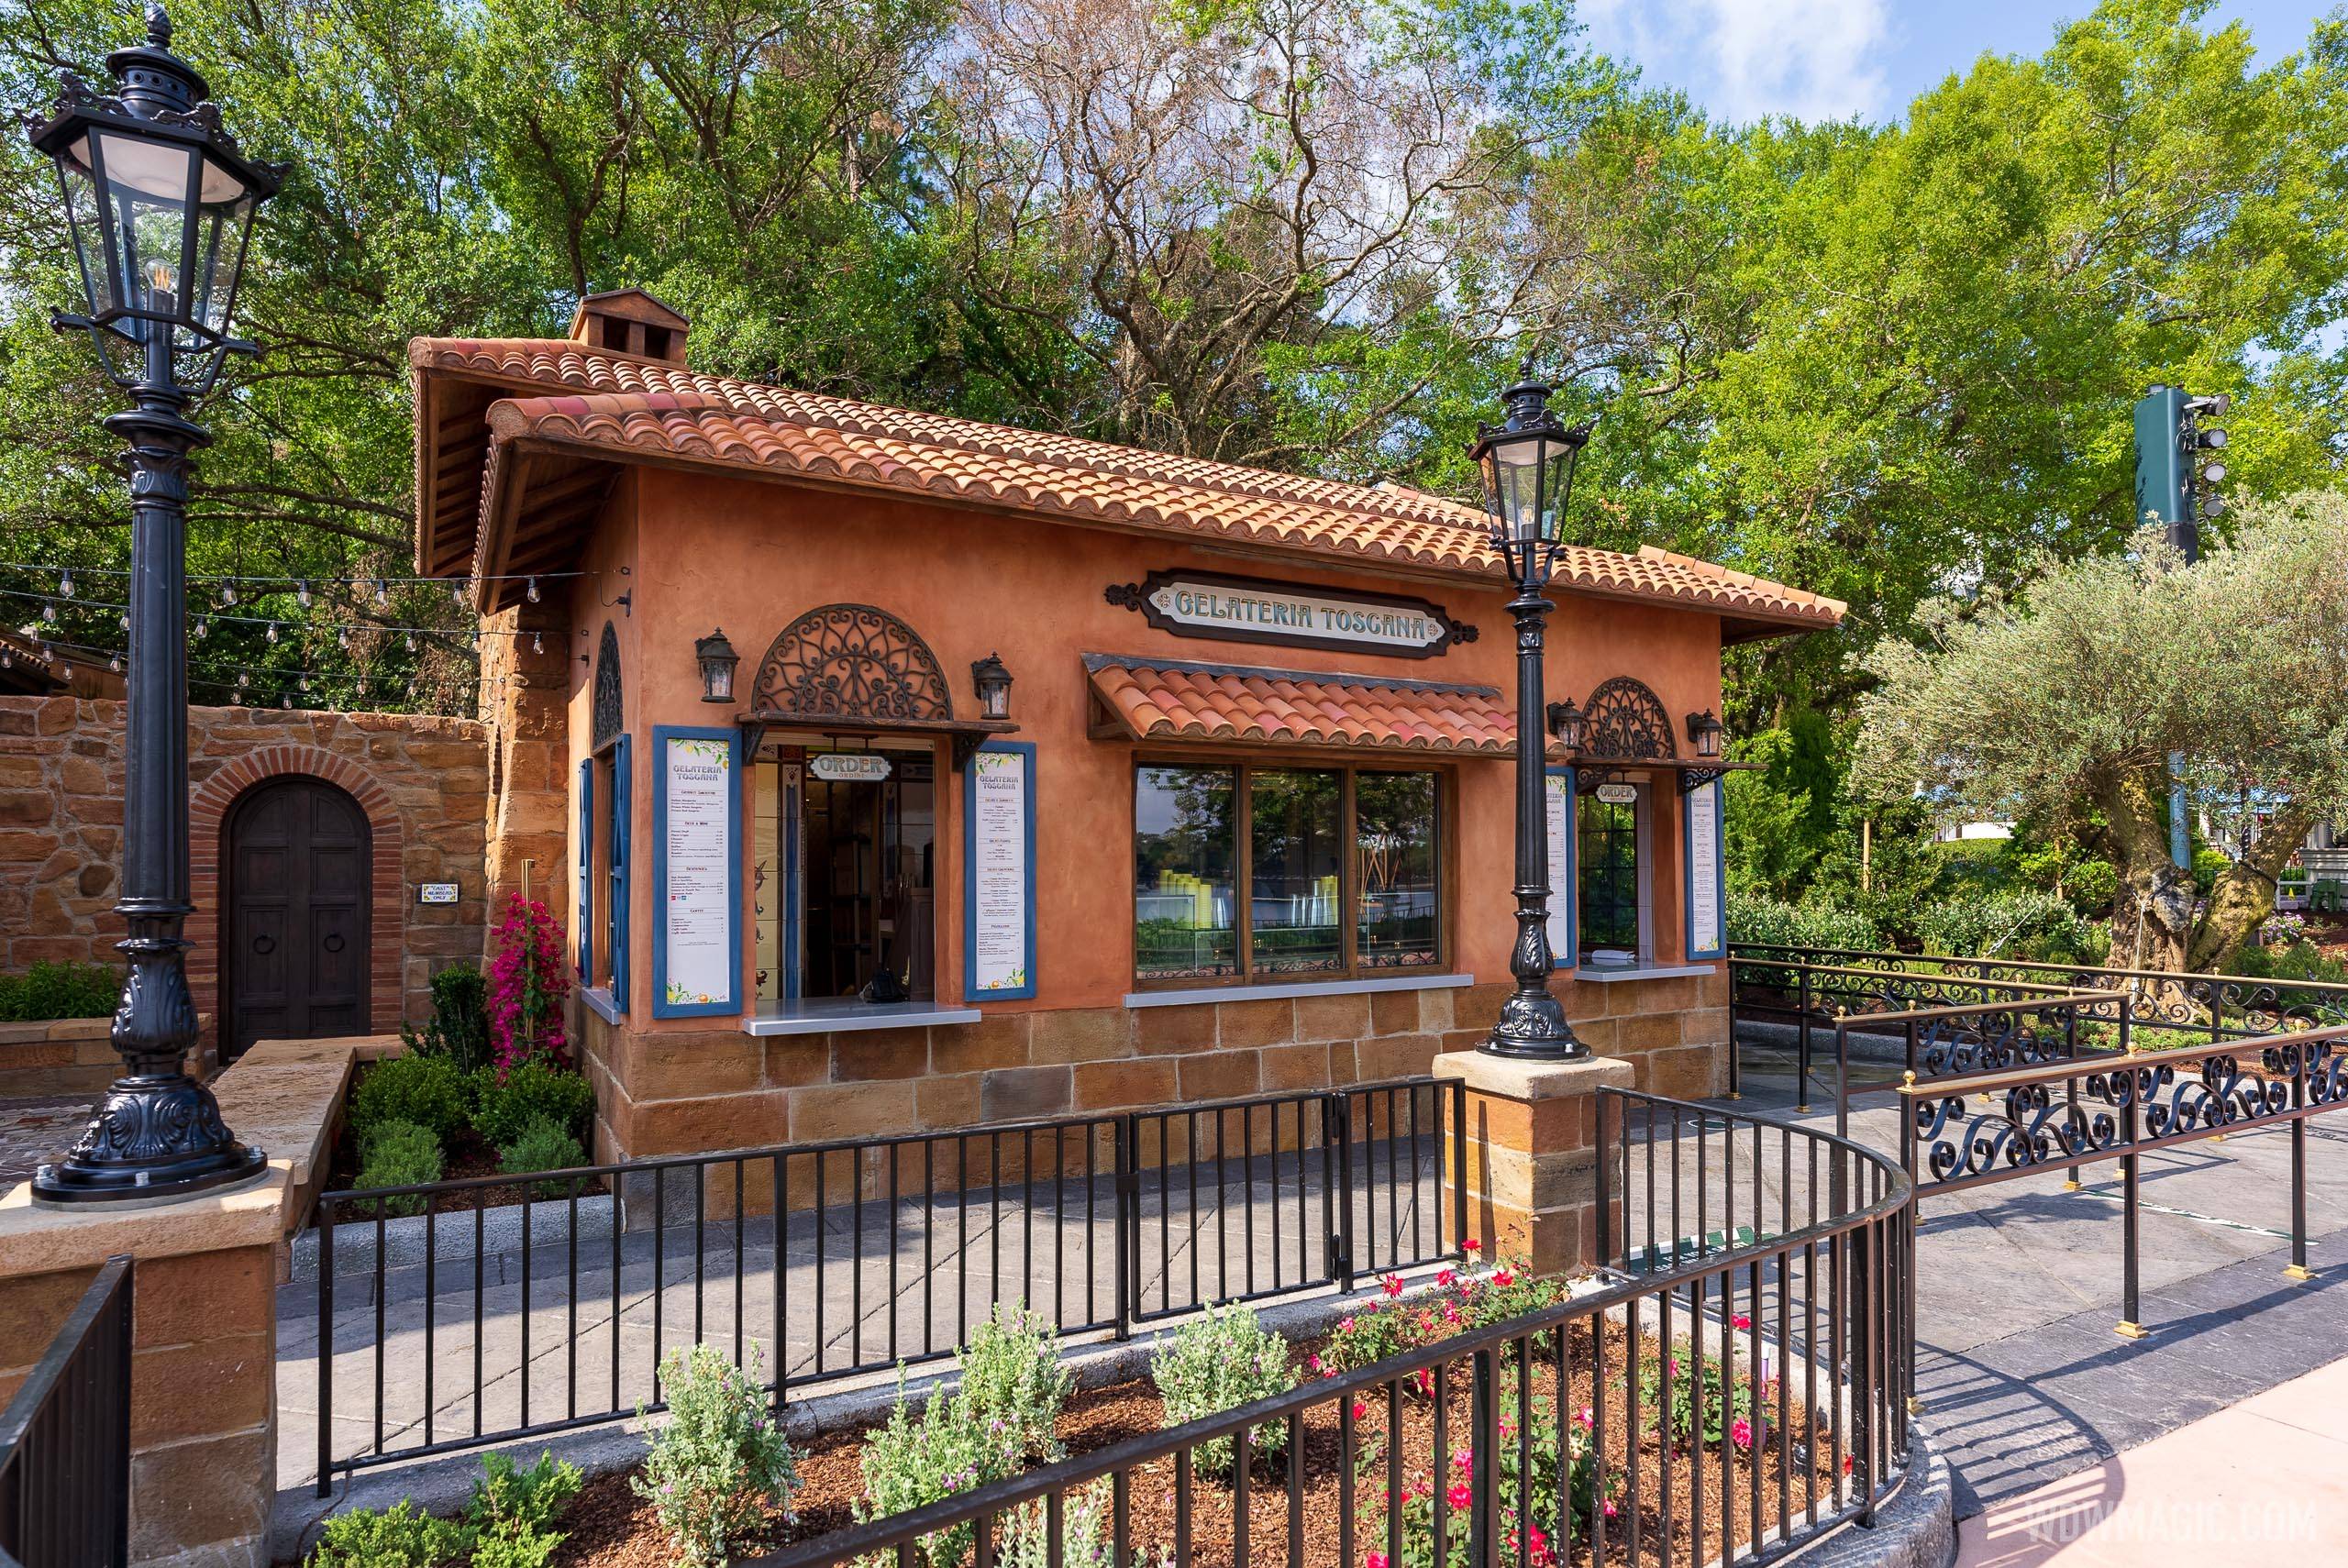 First look at EPCOT'S new Gelateria Toscana